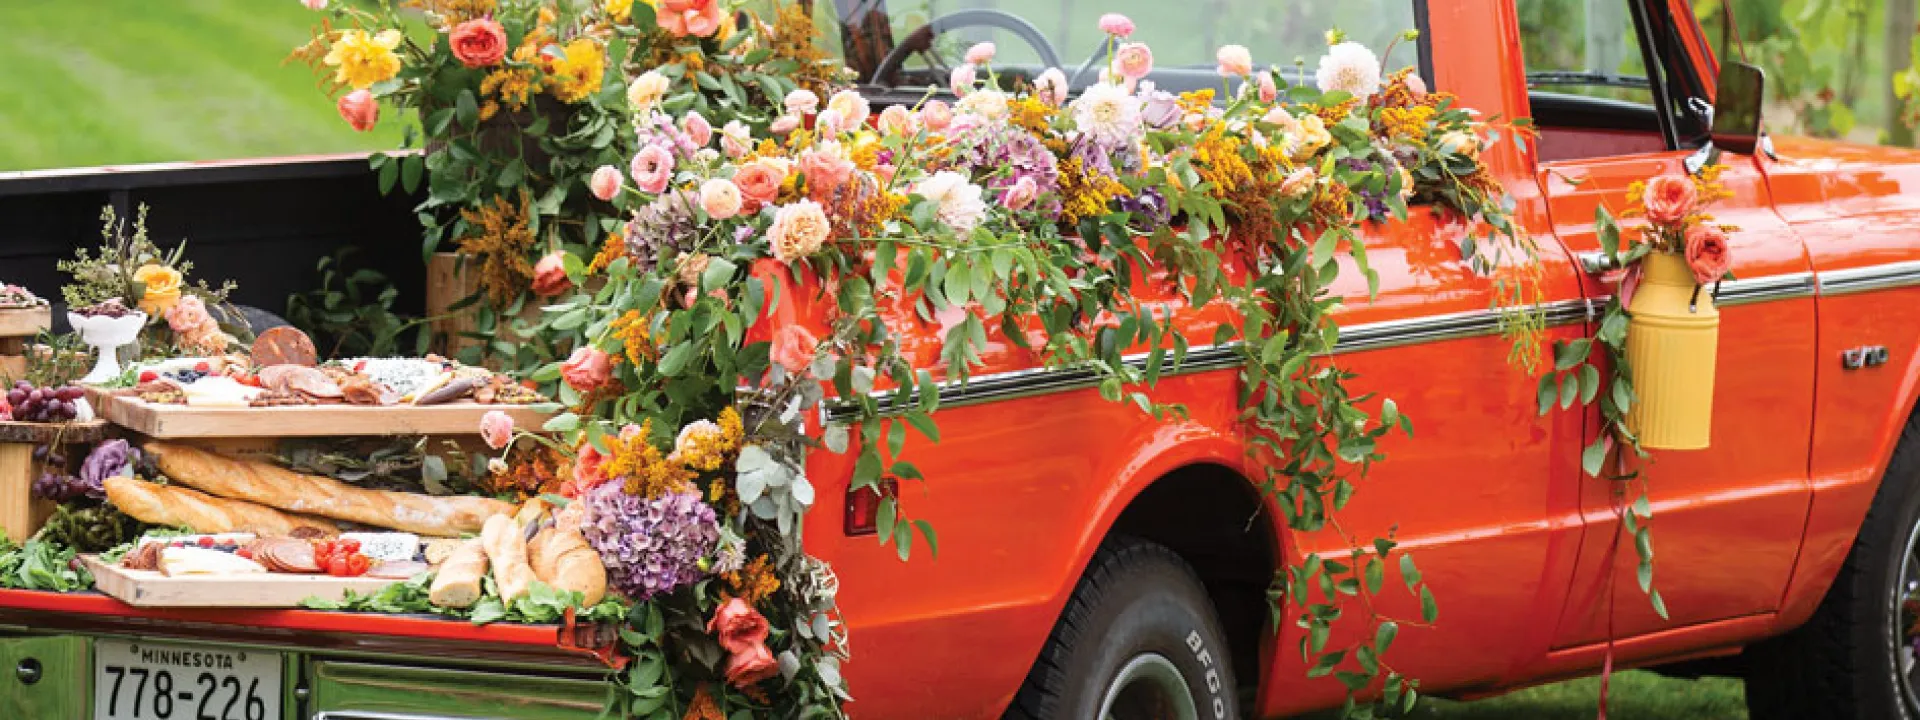 A '50s Chevy truck bedecked with bright florals and resplendent charcuterie.